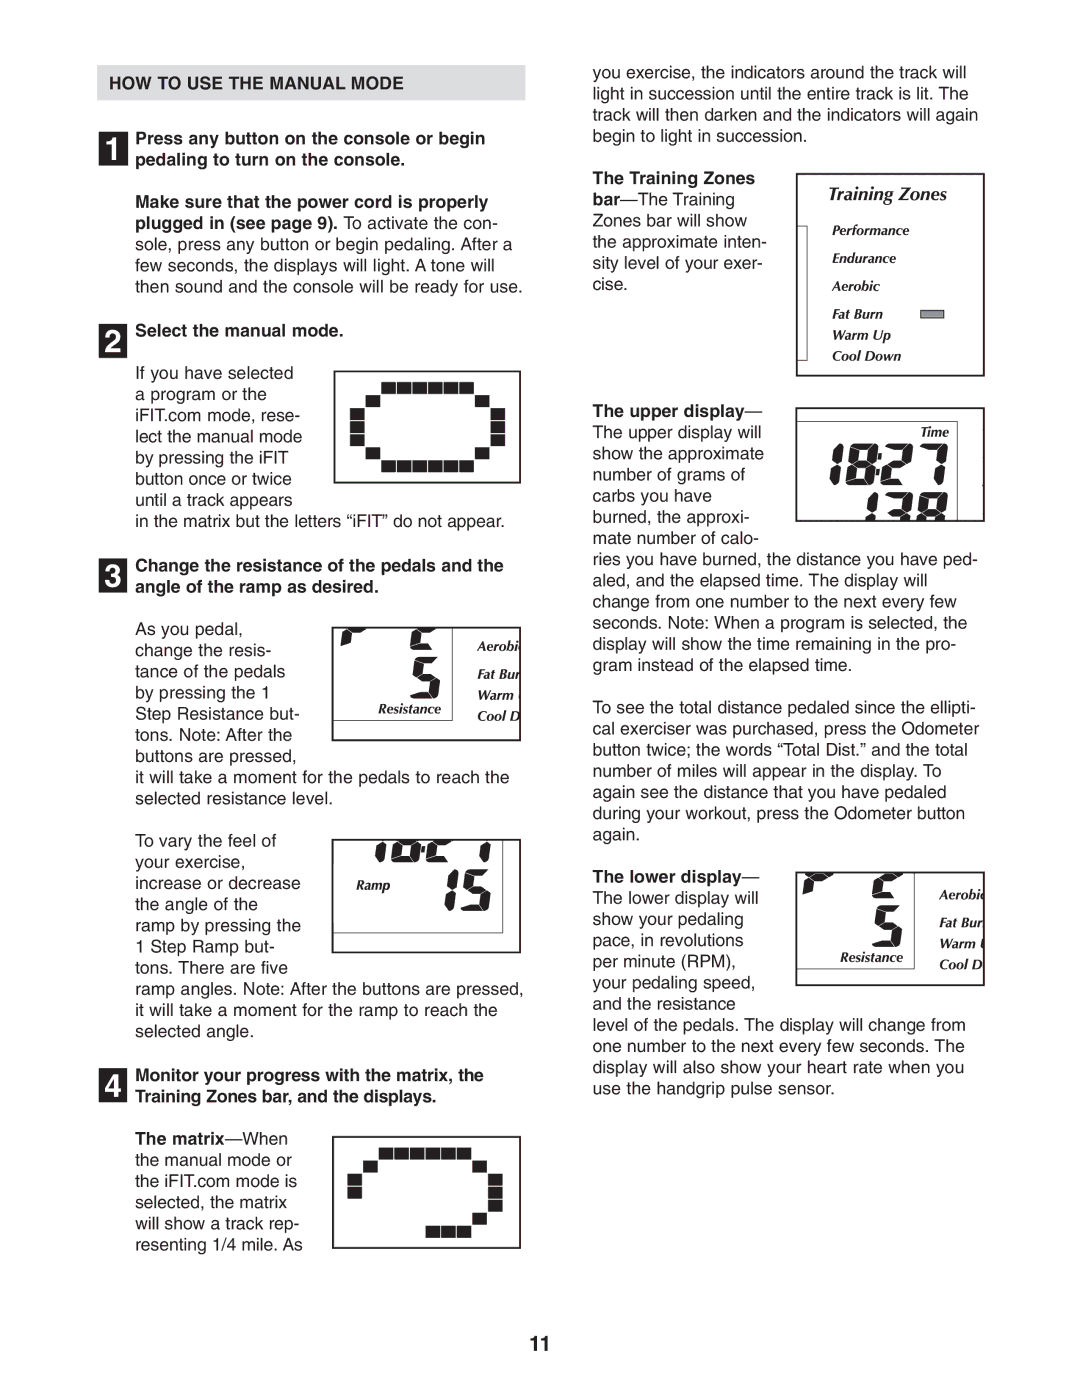 NordicTrack NEL70950 user manual HOW to USE the Manual Mode, Lower display 